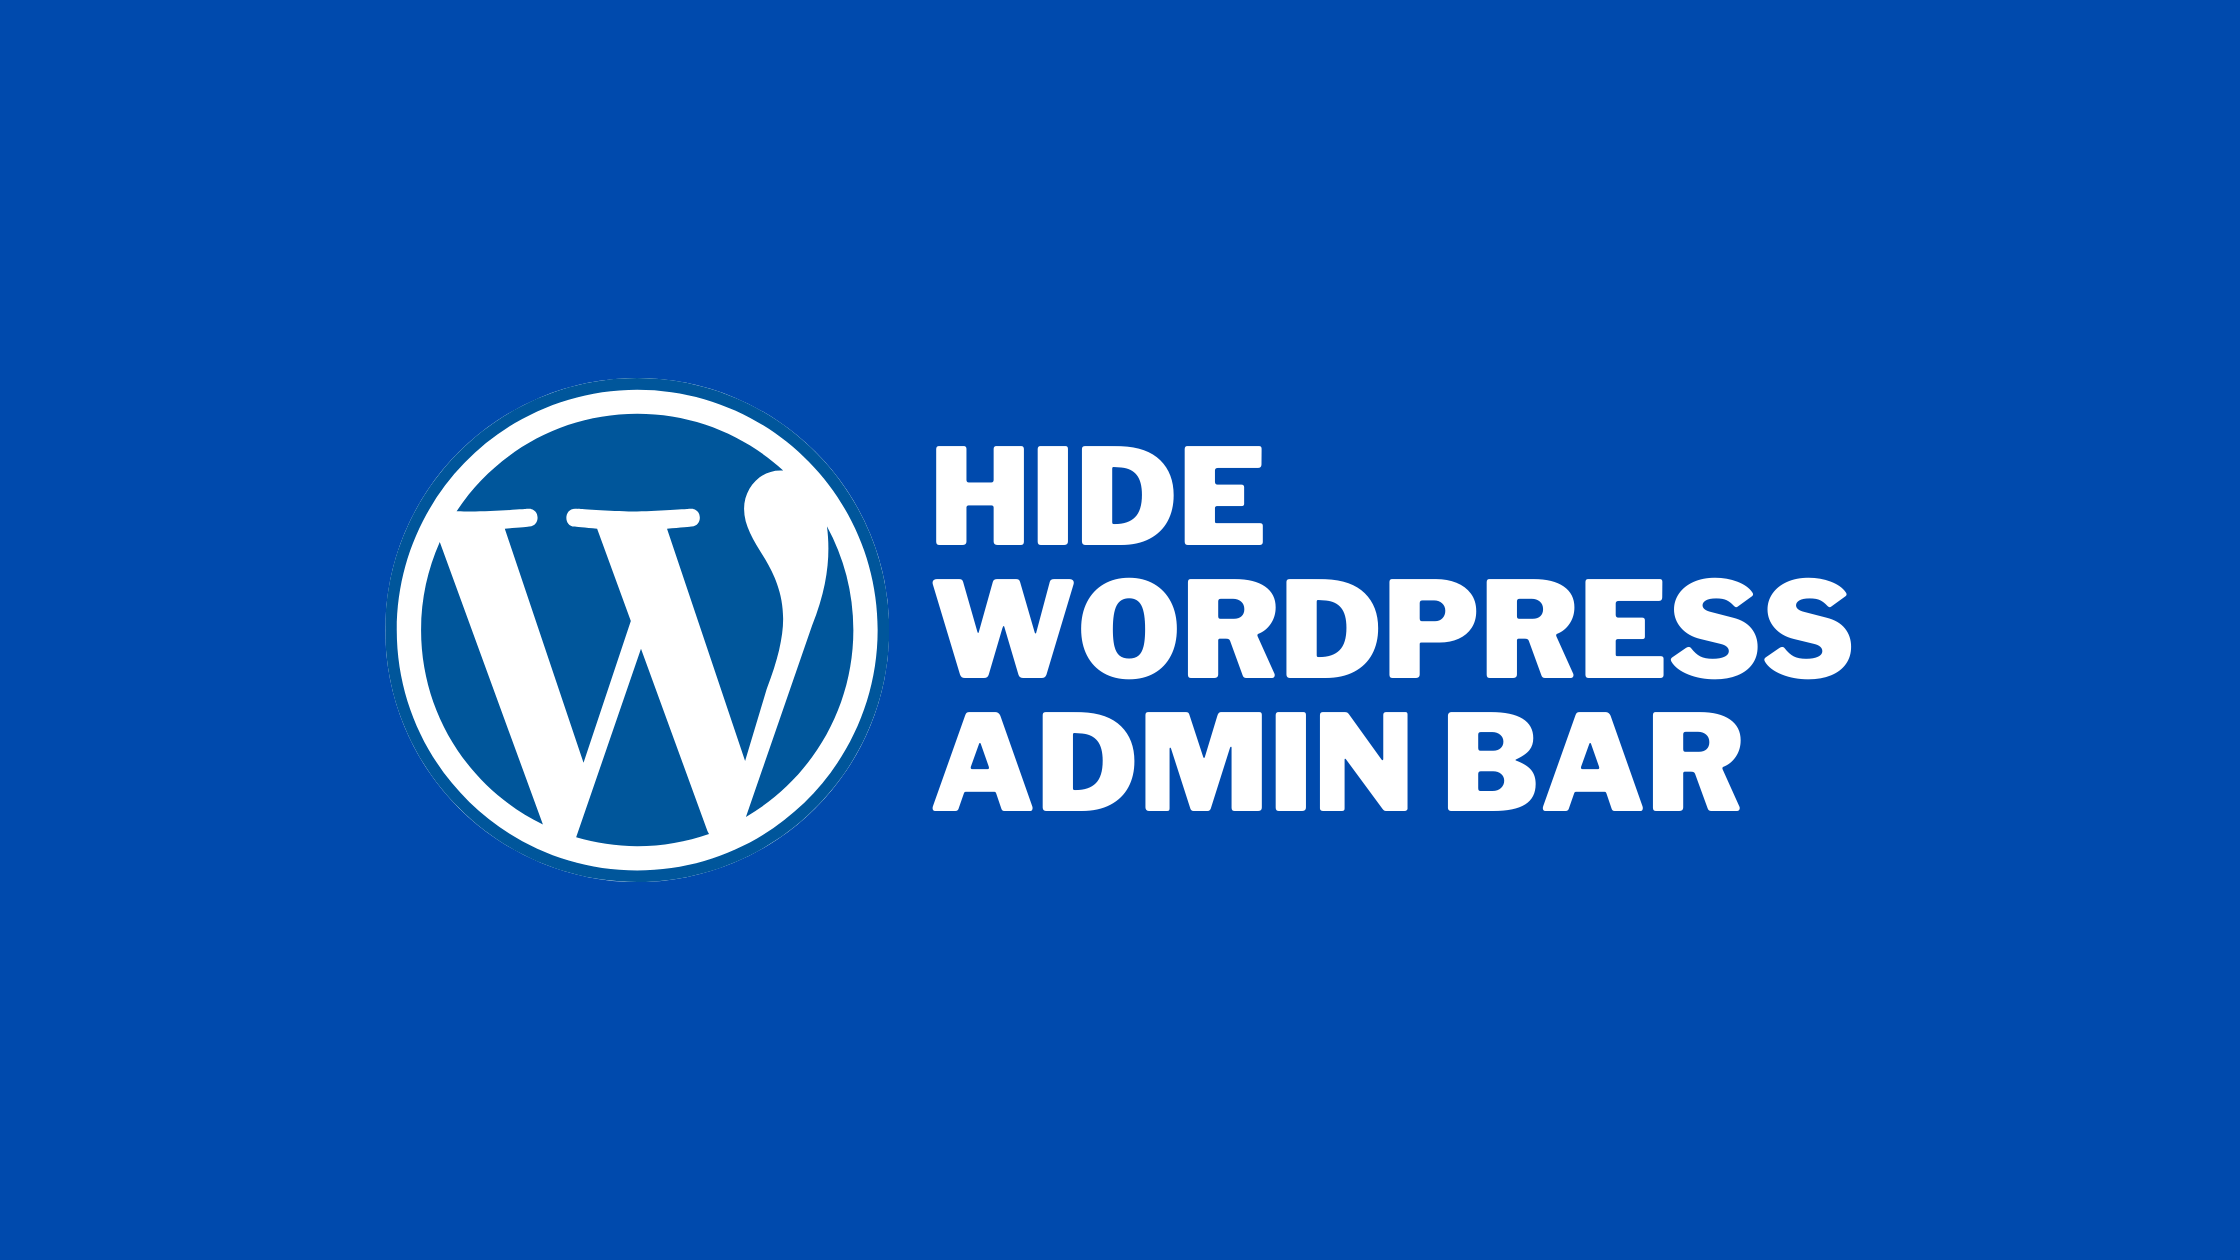 How to Hide WordPress Admin Bar for All Users Except Administrators